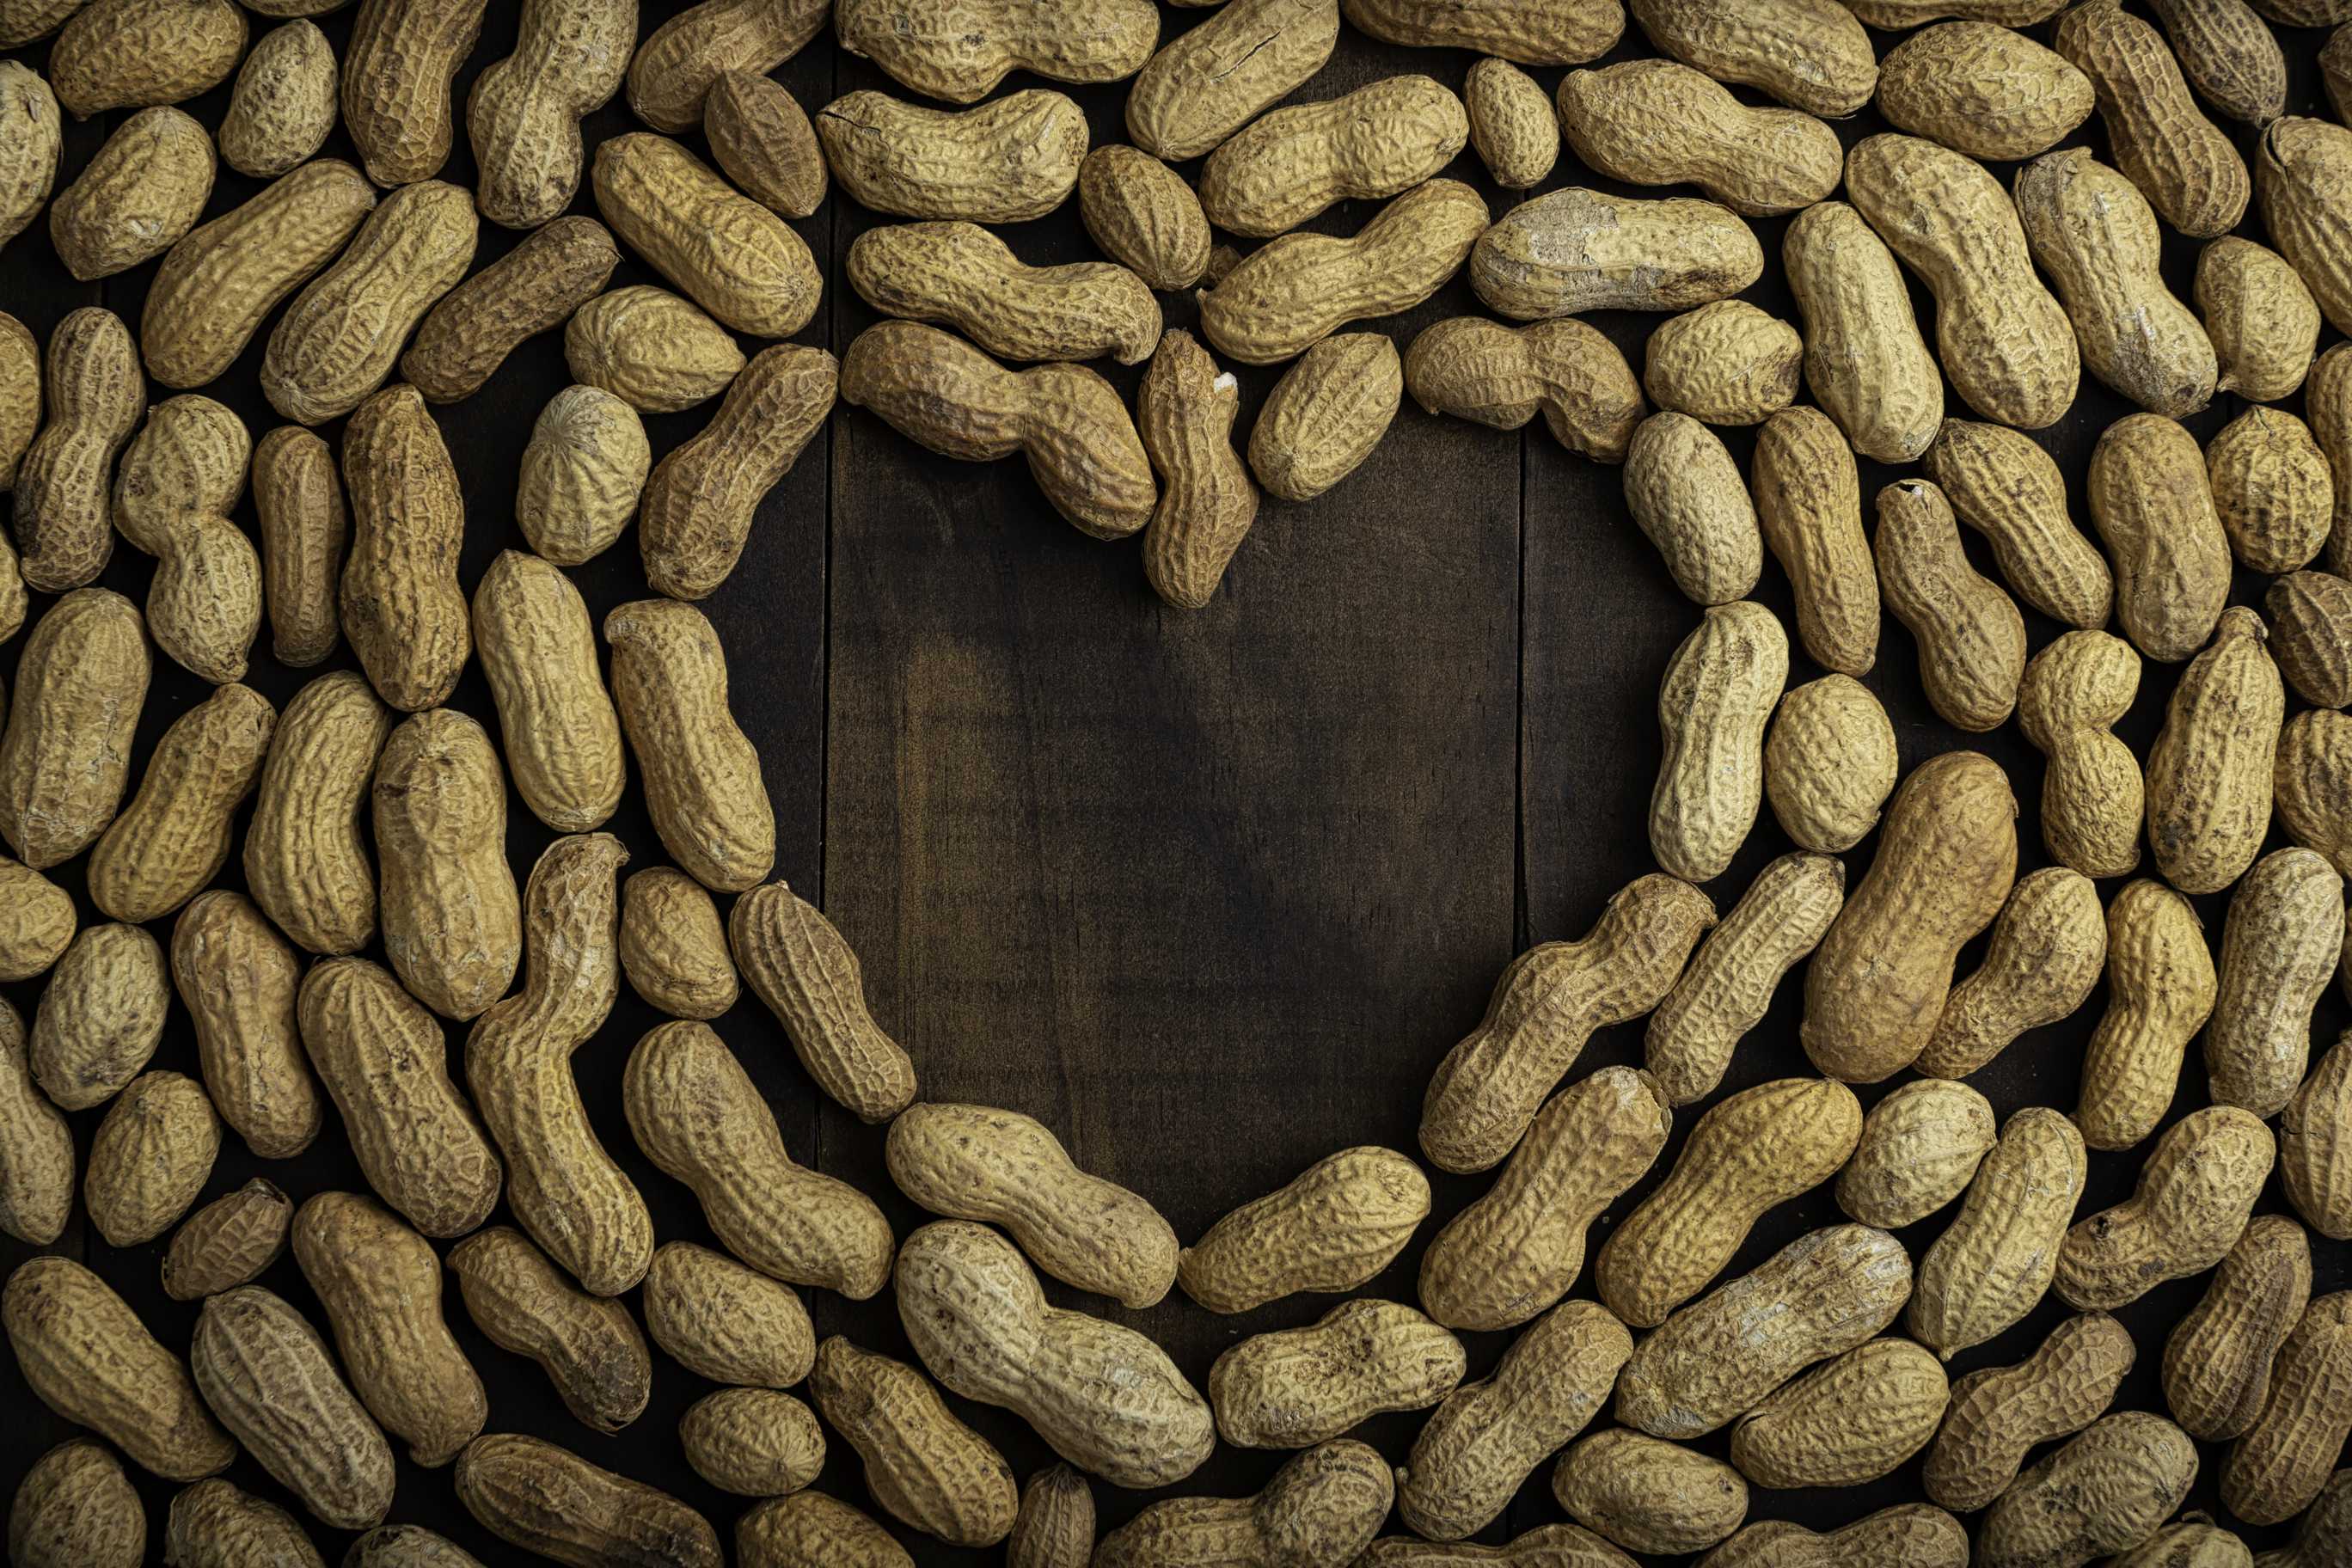 microsoft, professional faqs: are dry roasted peanuts good for people with diabetes?